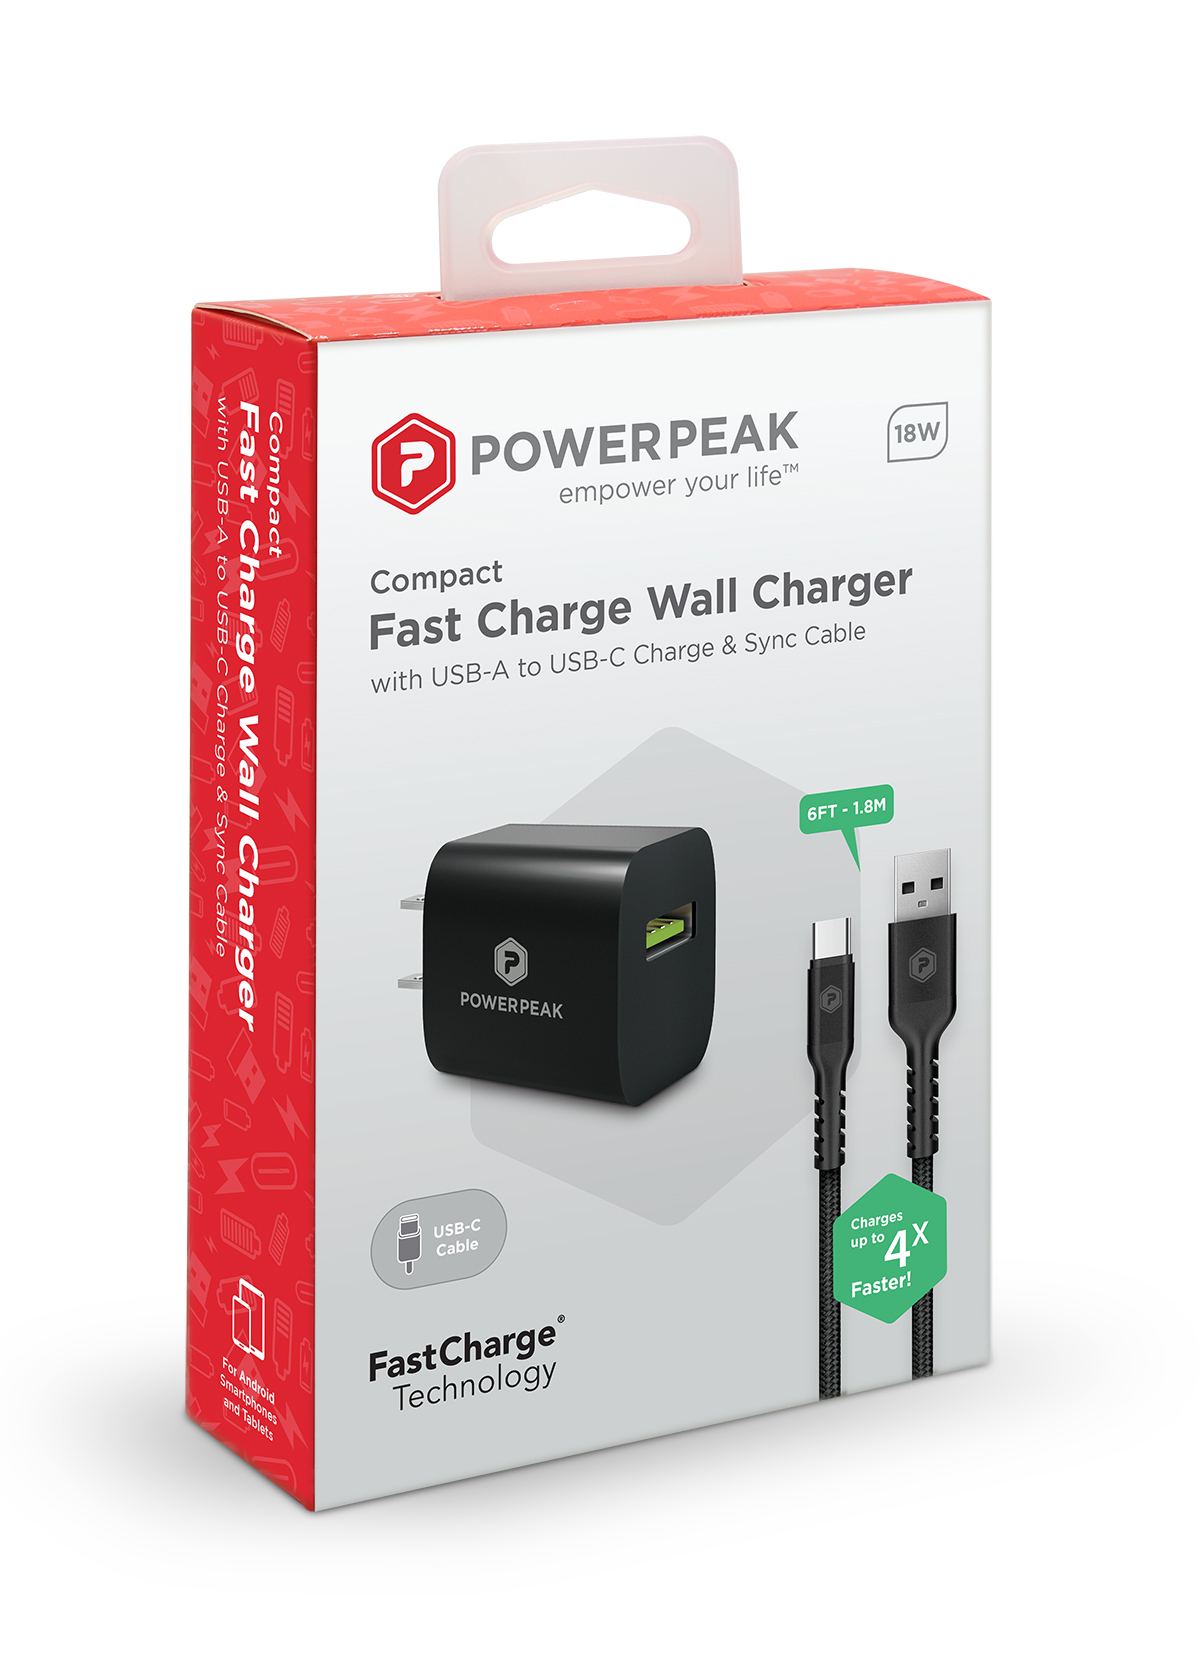 PowerPeak 18W USB-A to USB-C Wall Charger with 6ft. Cable - Black